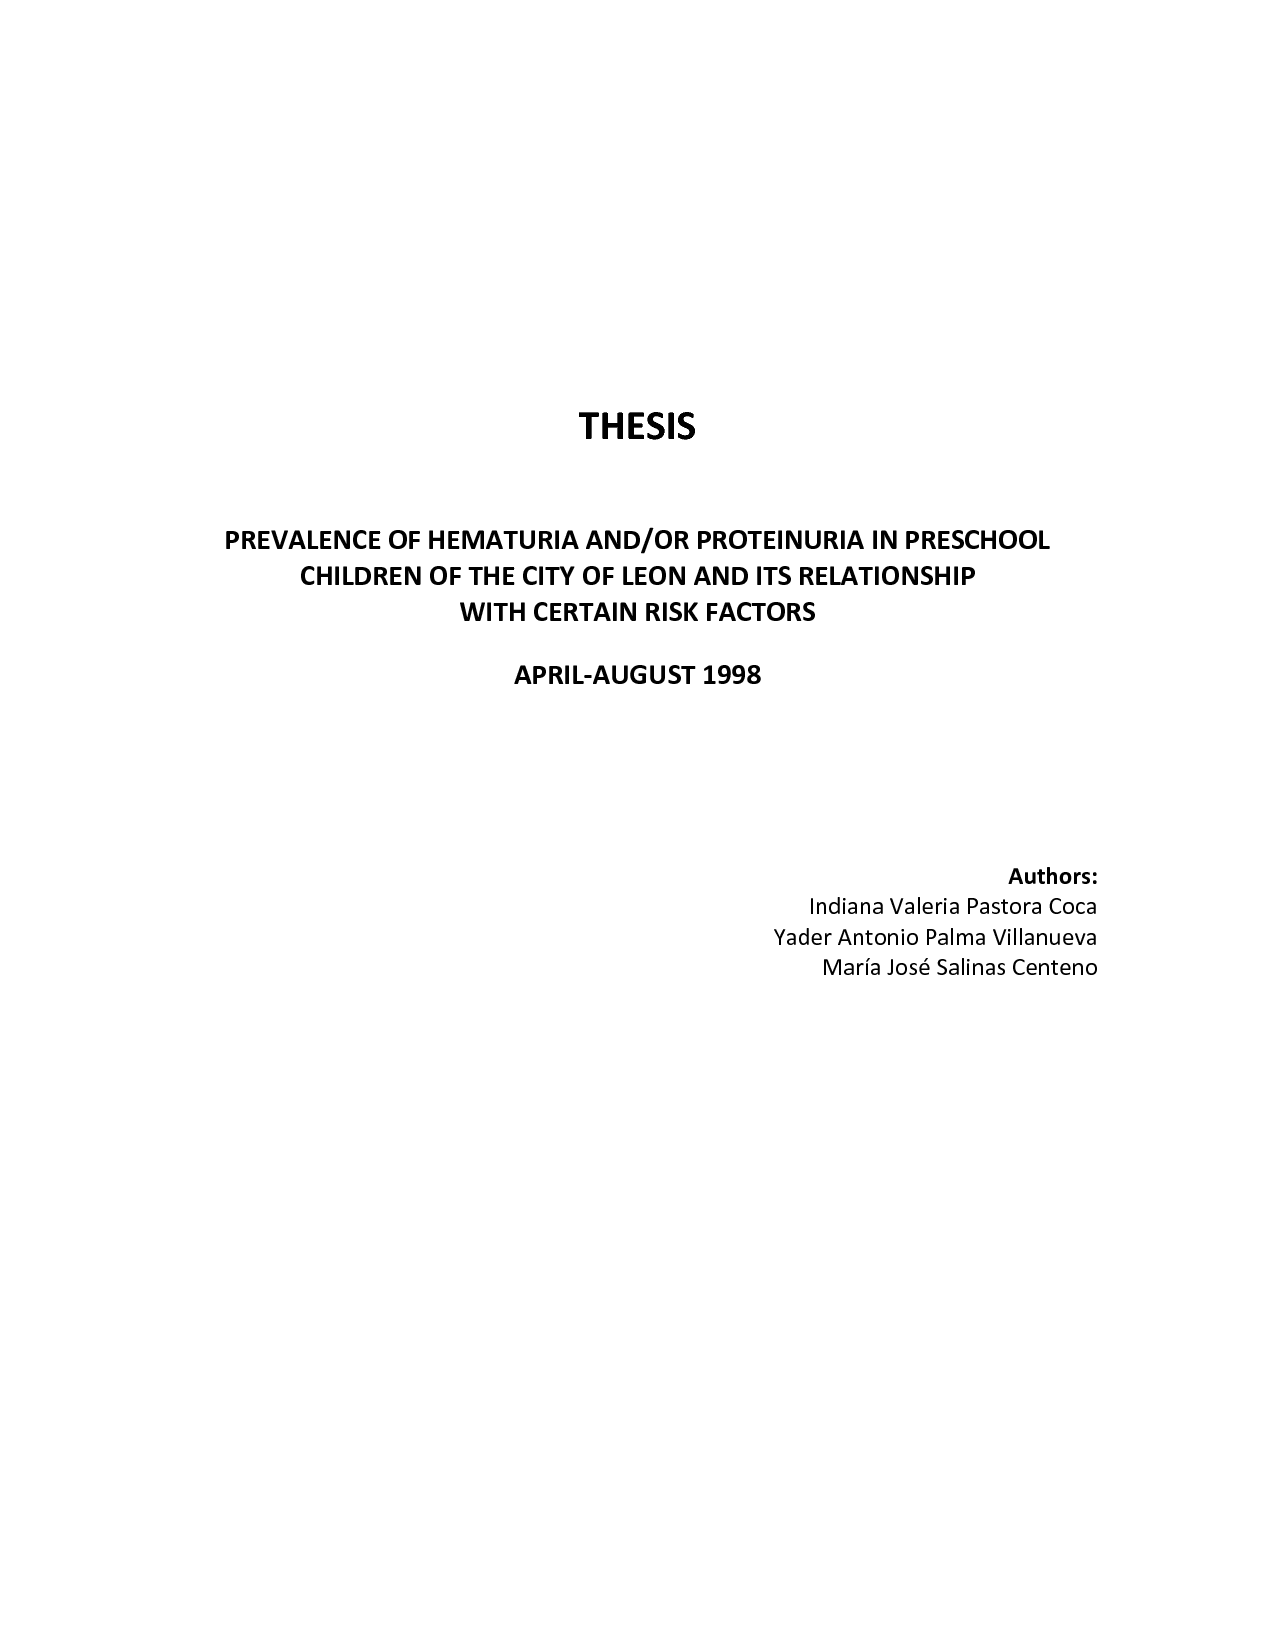 How to Write Dedication Page for a Thesis, Dissertation or a Research Paper